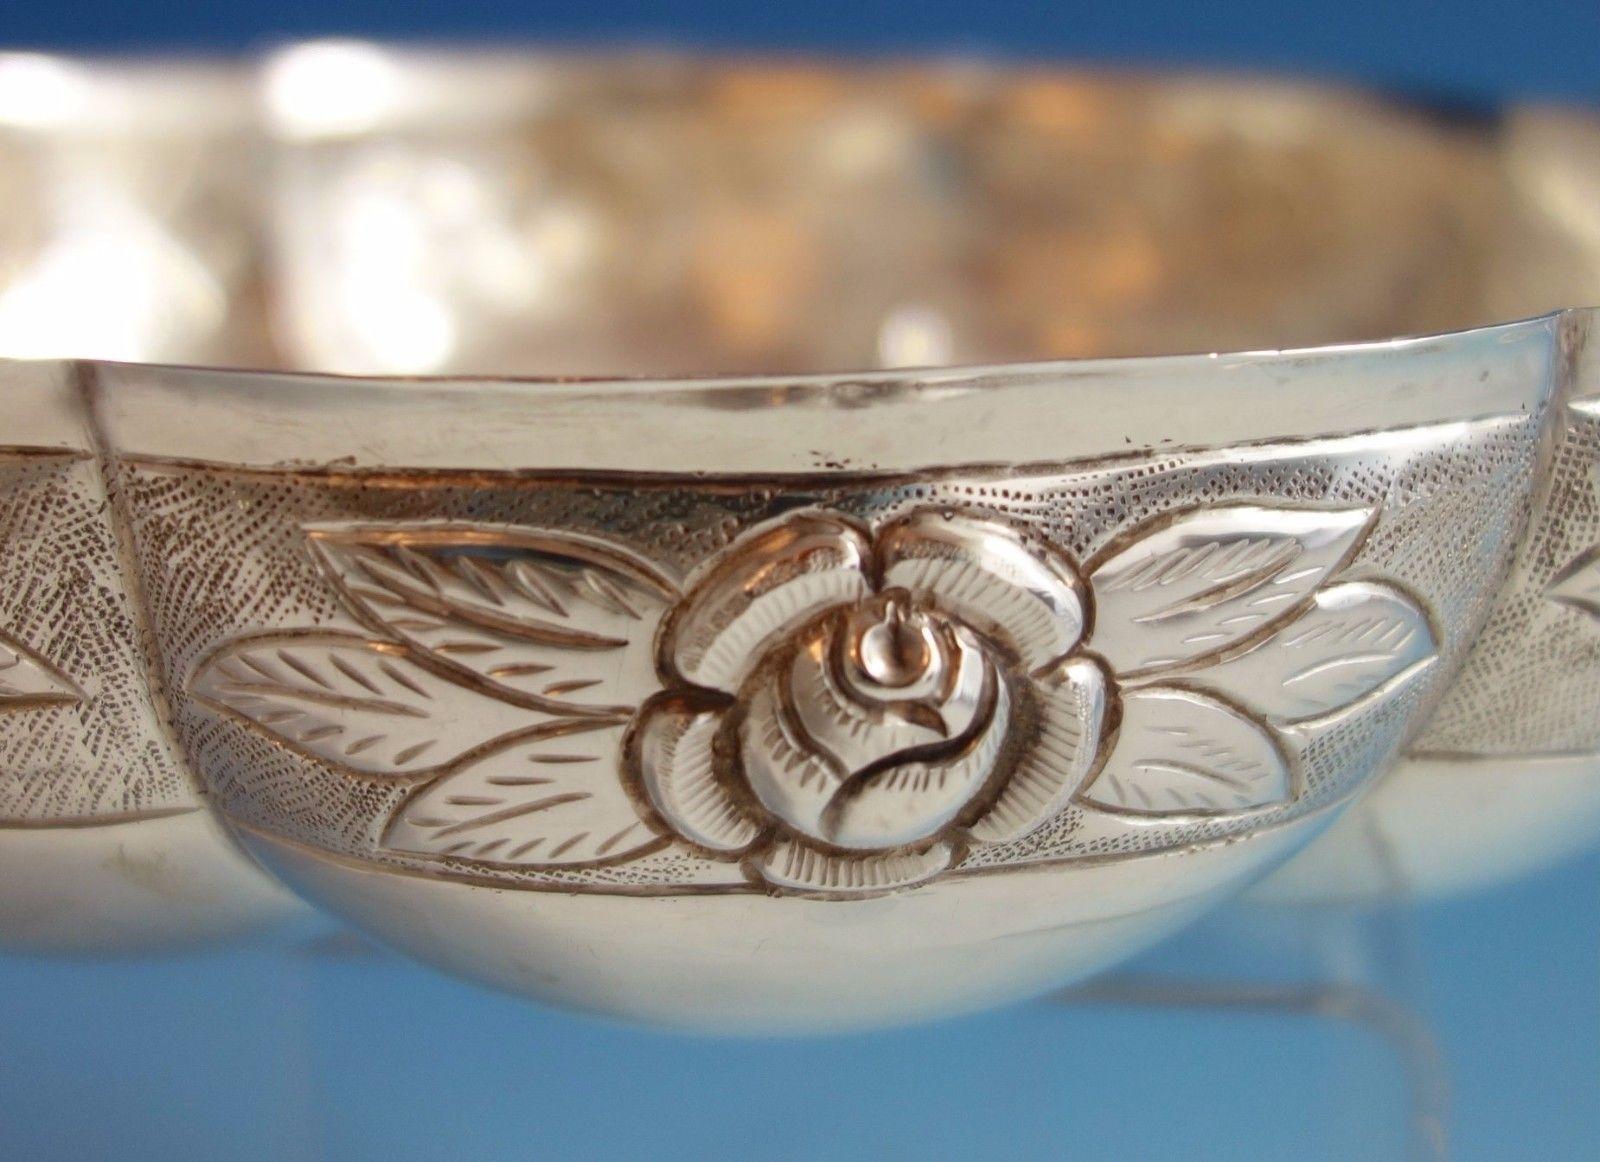 Aztec Rose by Sanborns
Stunning Aztec Rose by Sanborns sterling silver bowl with two rose handles. It is marked Sanborns Mexico and weighs 15.1 ozt. This piece measures 2 1/8